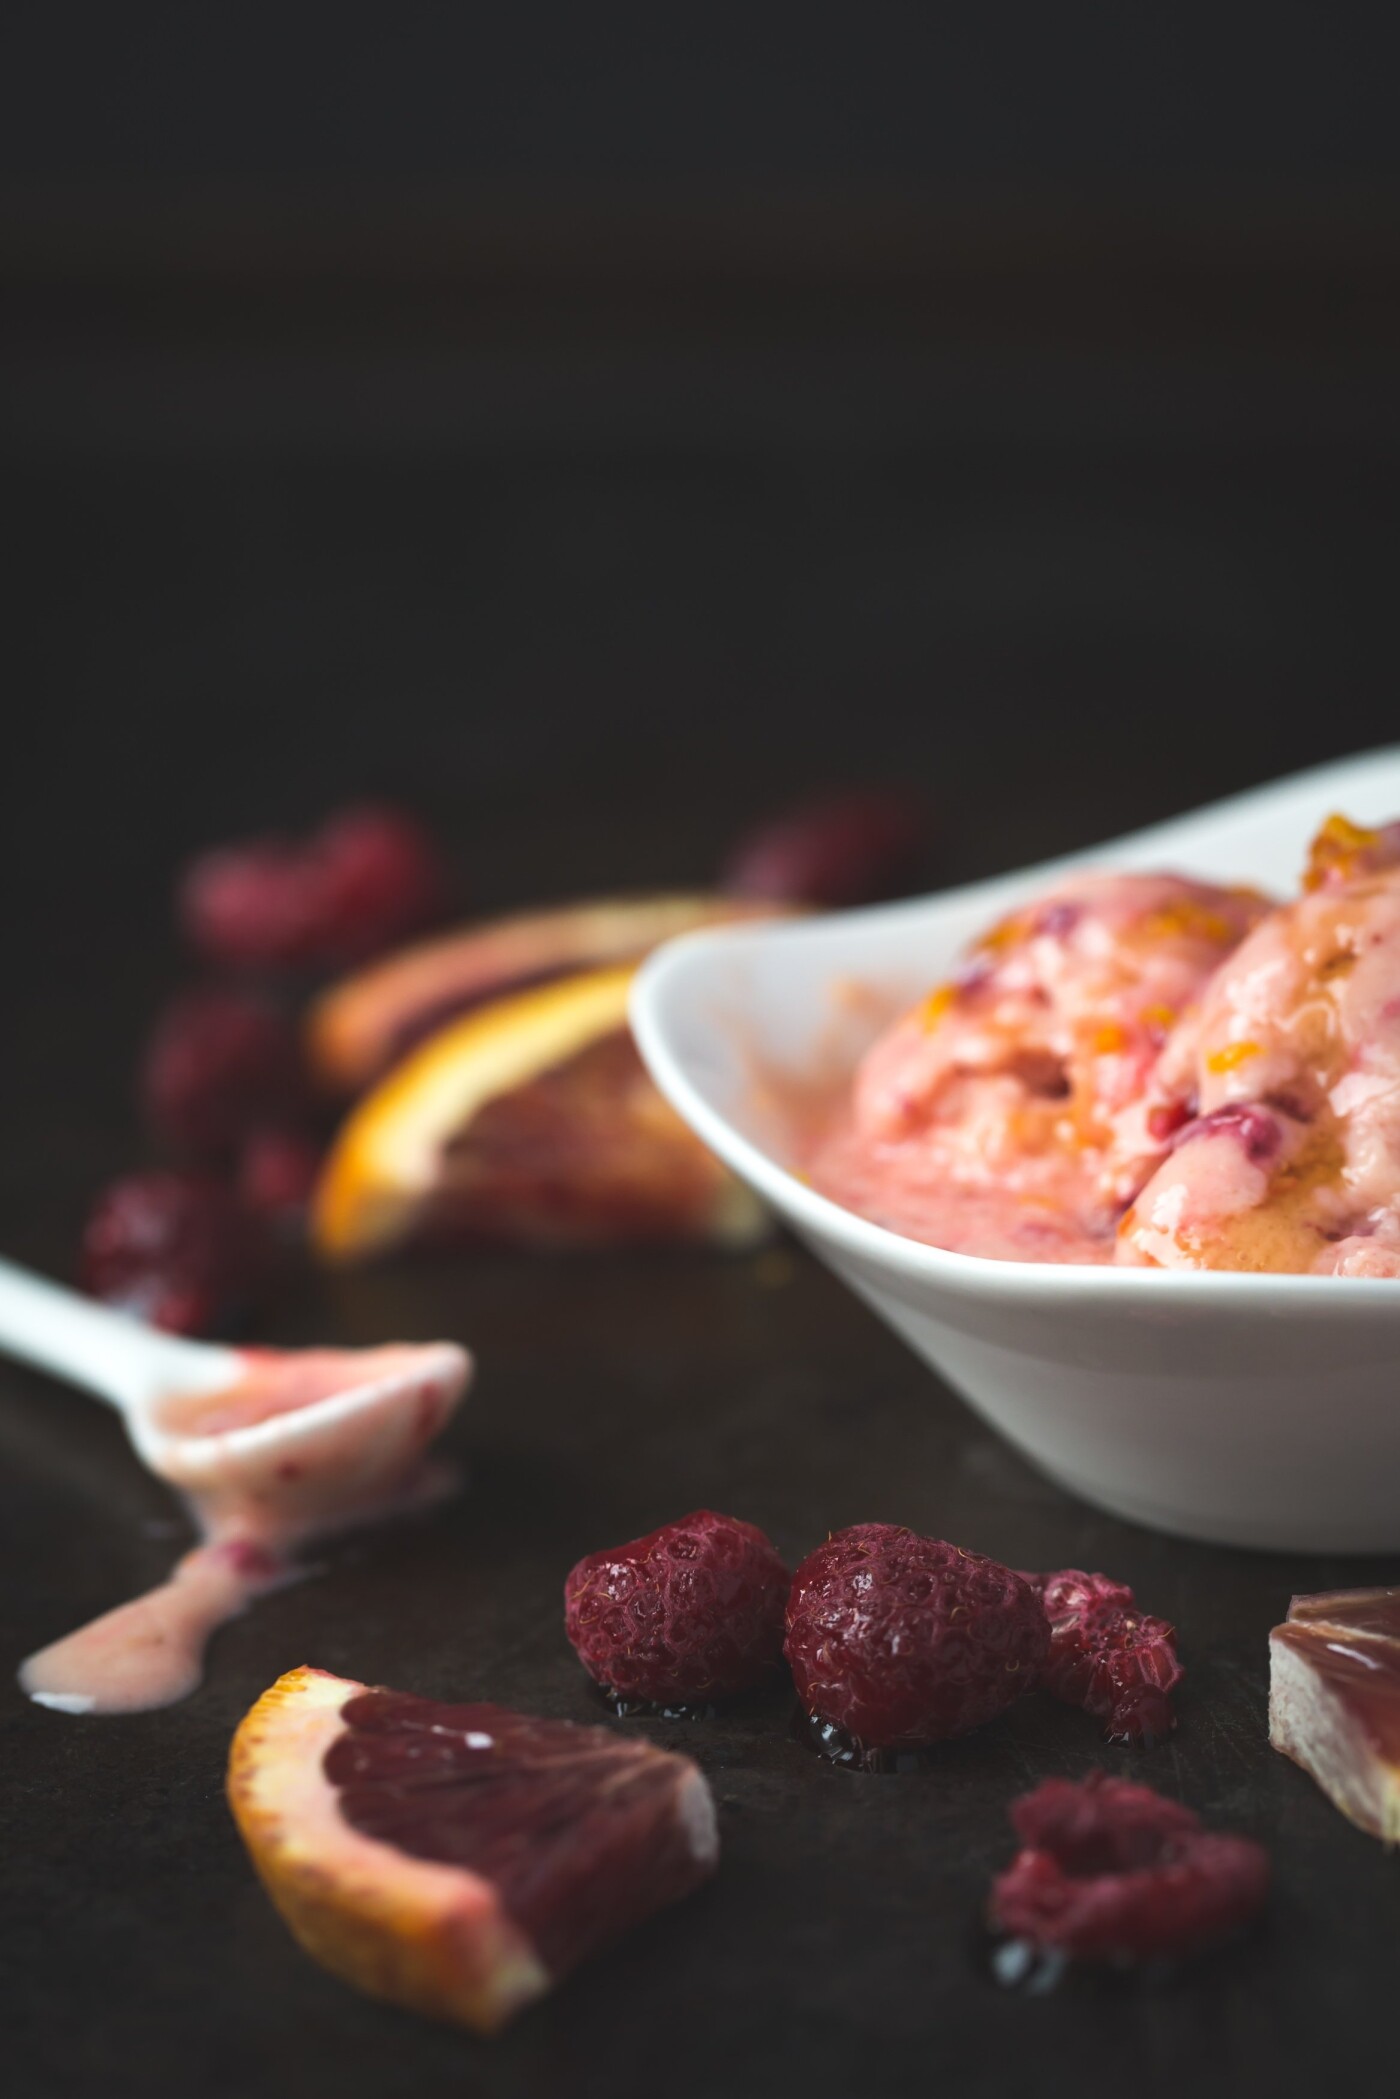 This is one of my go-to treats, easy to make and full of flavour. Made with vanilla greek yogurt, blood oranges and  raspberries blended to perfection, frozen, then drizzled with honey. It's a perfectly delicious alternative to ice-cream.